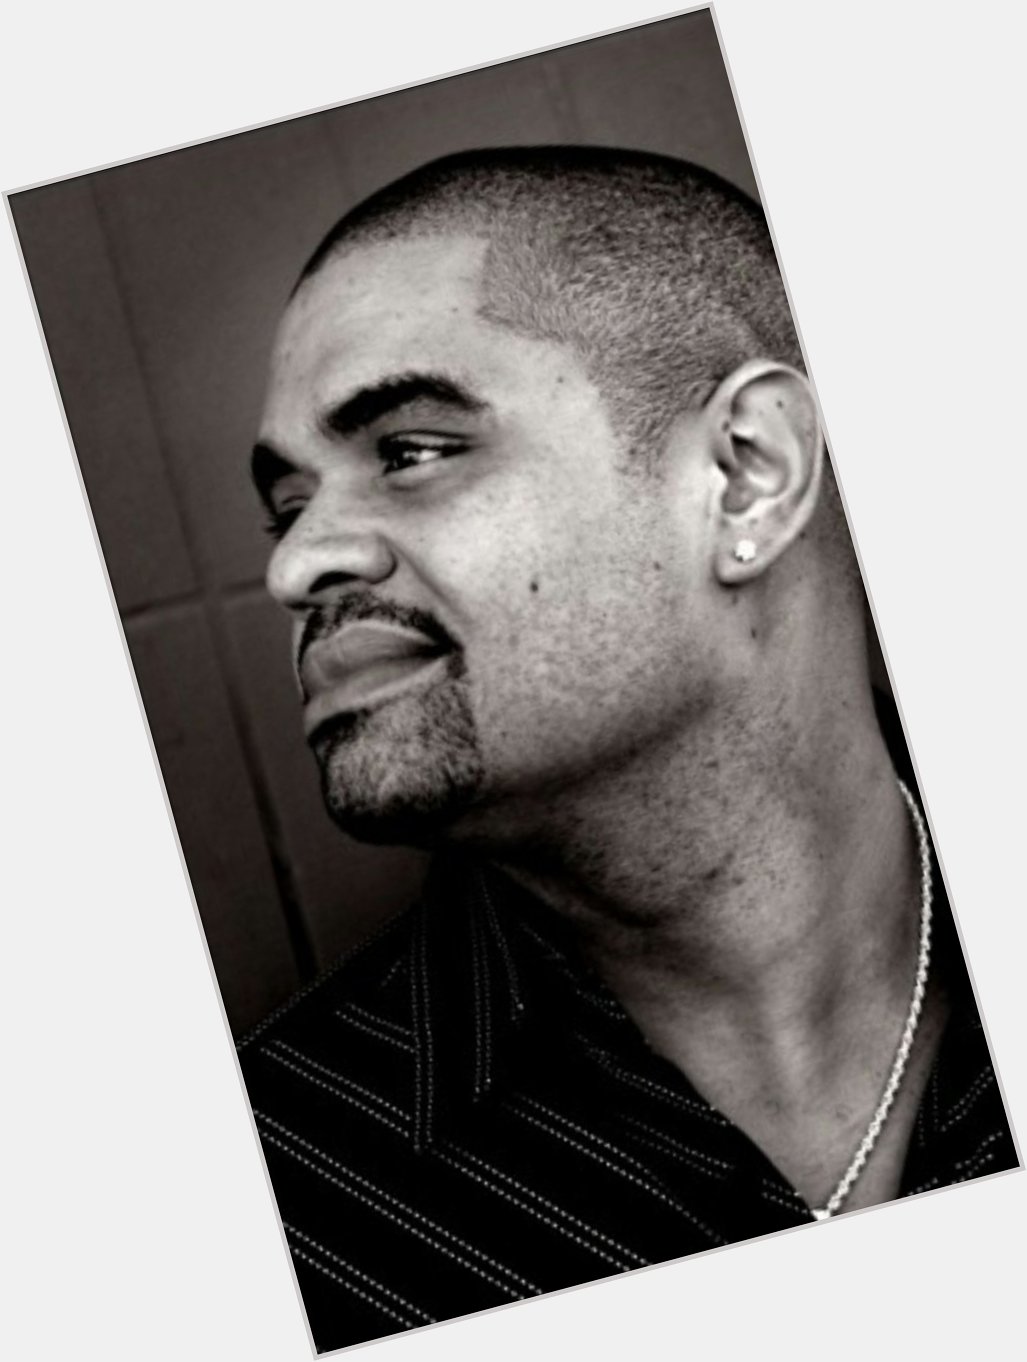 Happy Birthday to Heavy D your music is very dope ! RIP   